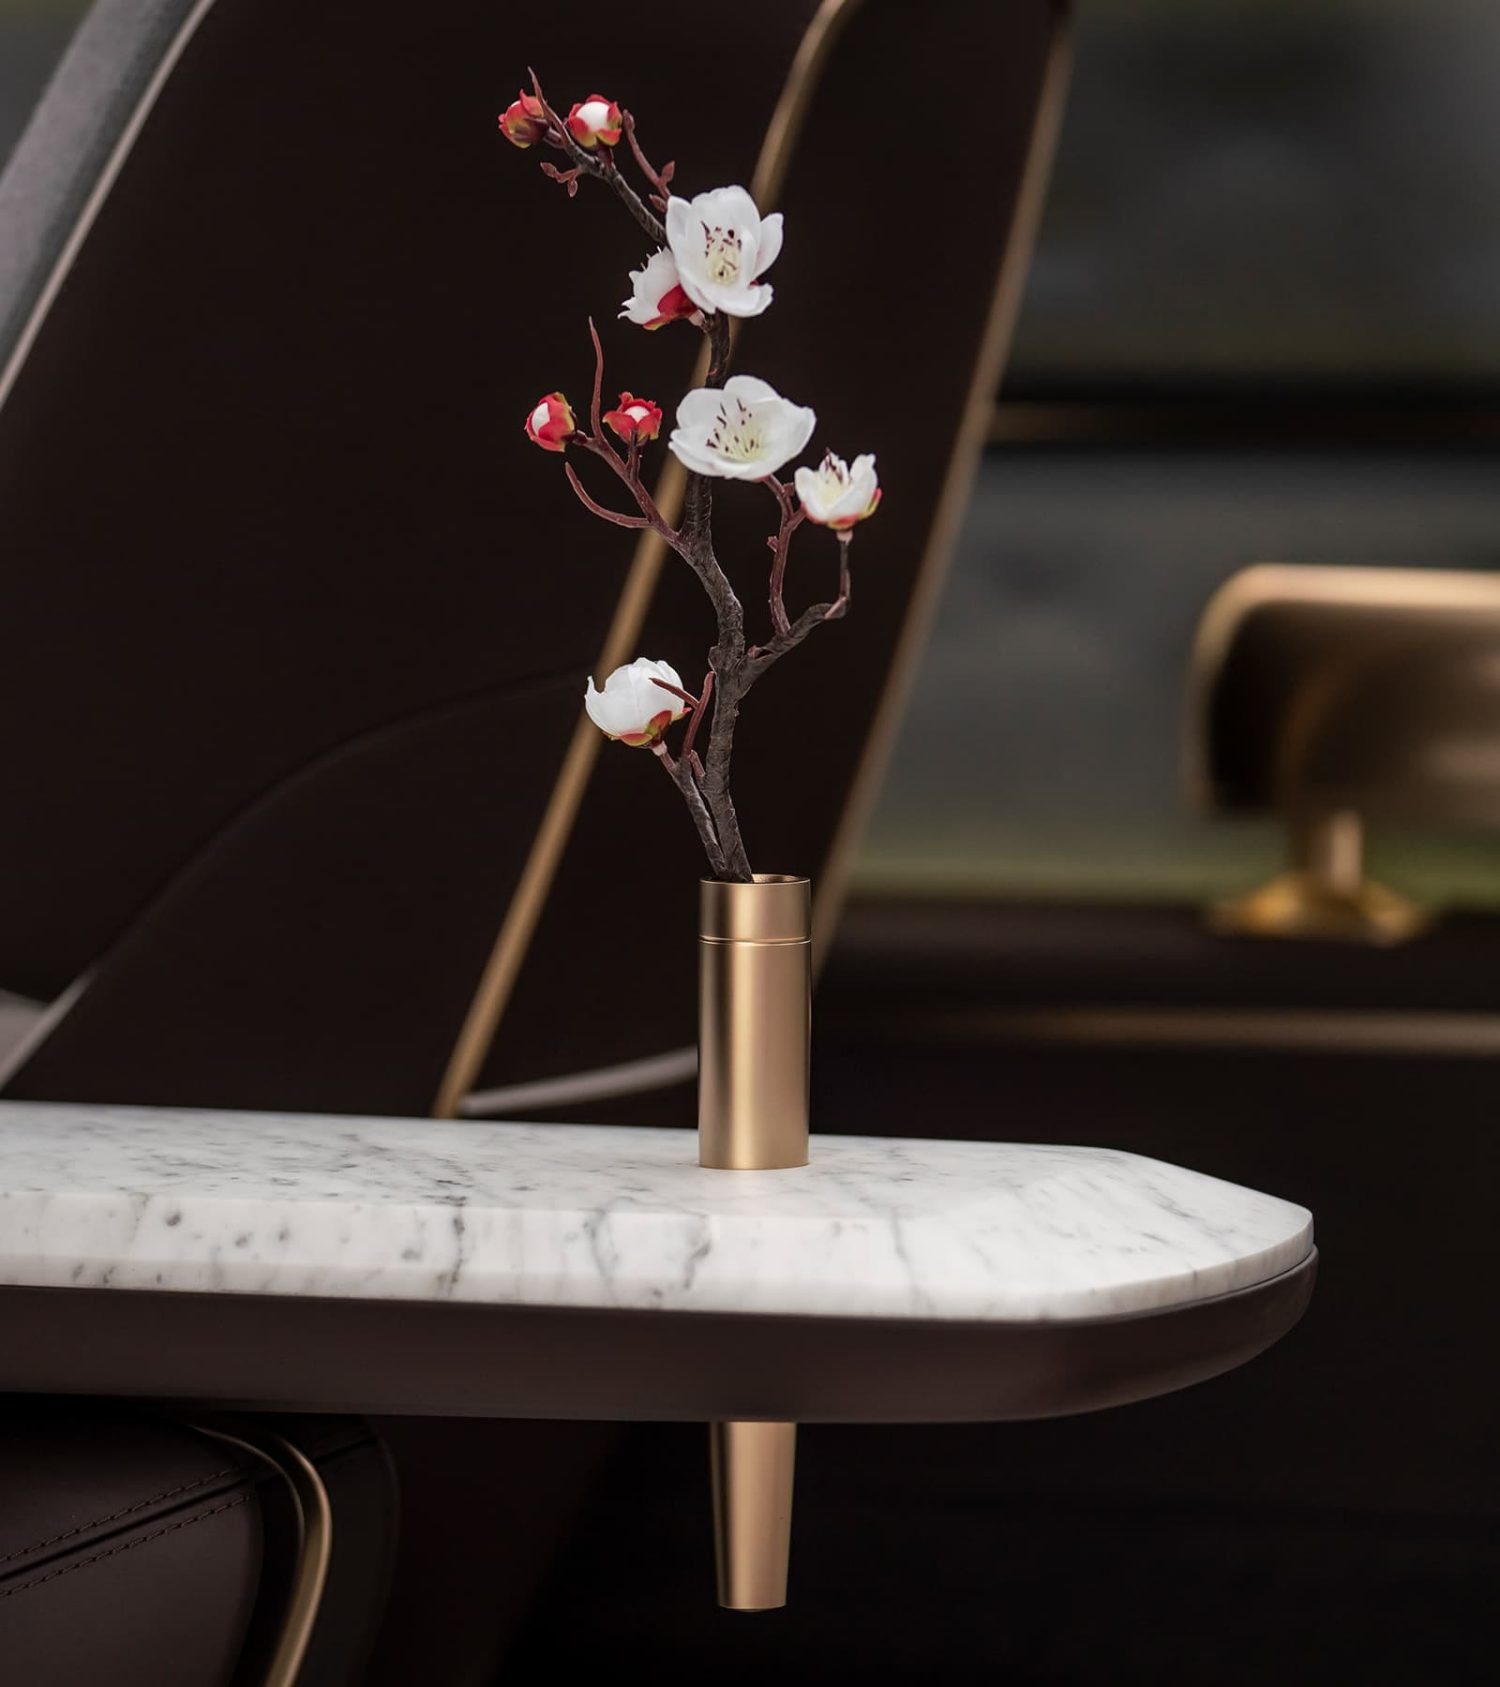 Infiniti QX Inspiration interior divider with flowers